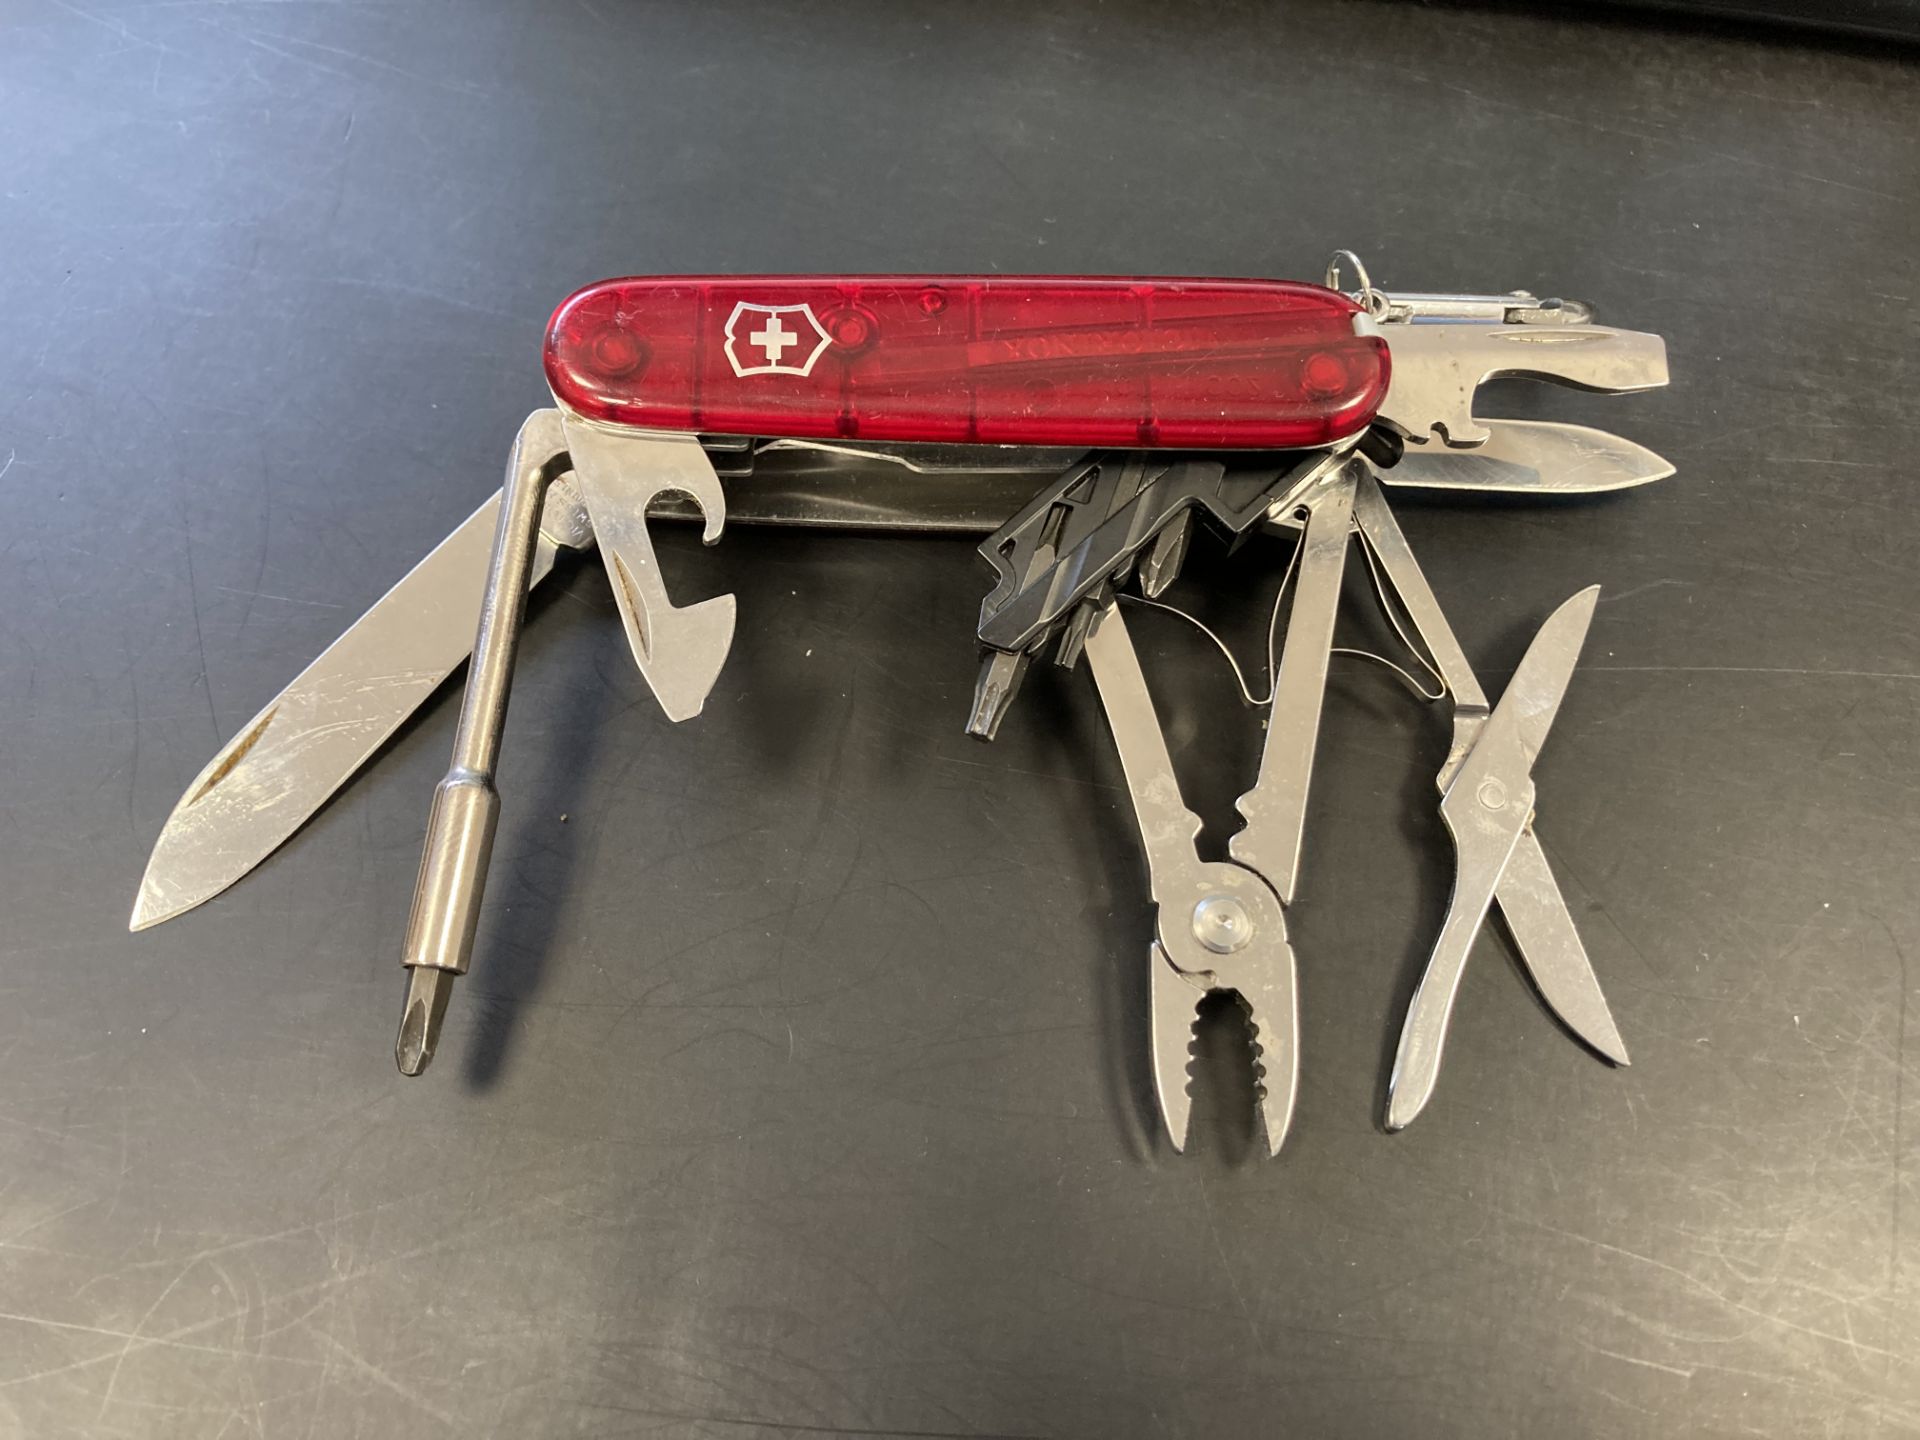 Five Victorinox penknives complete with boxes or cases (Saleroom location: S3 Counter) - Image 2 of 6